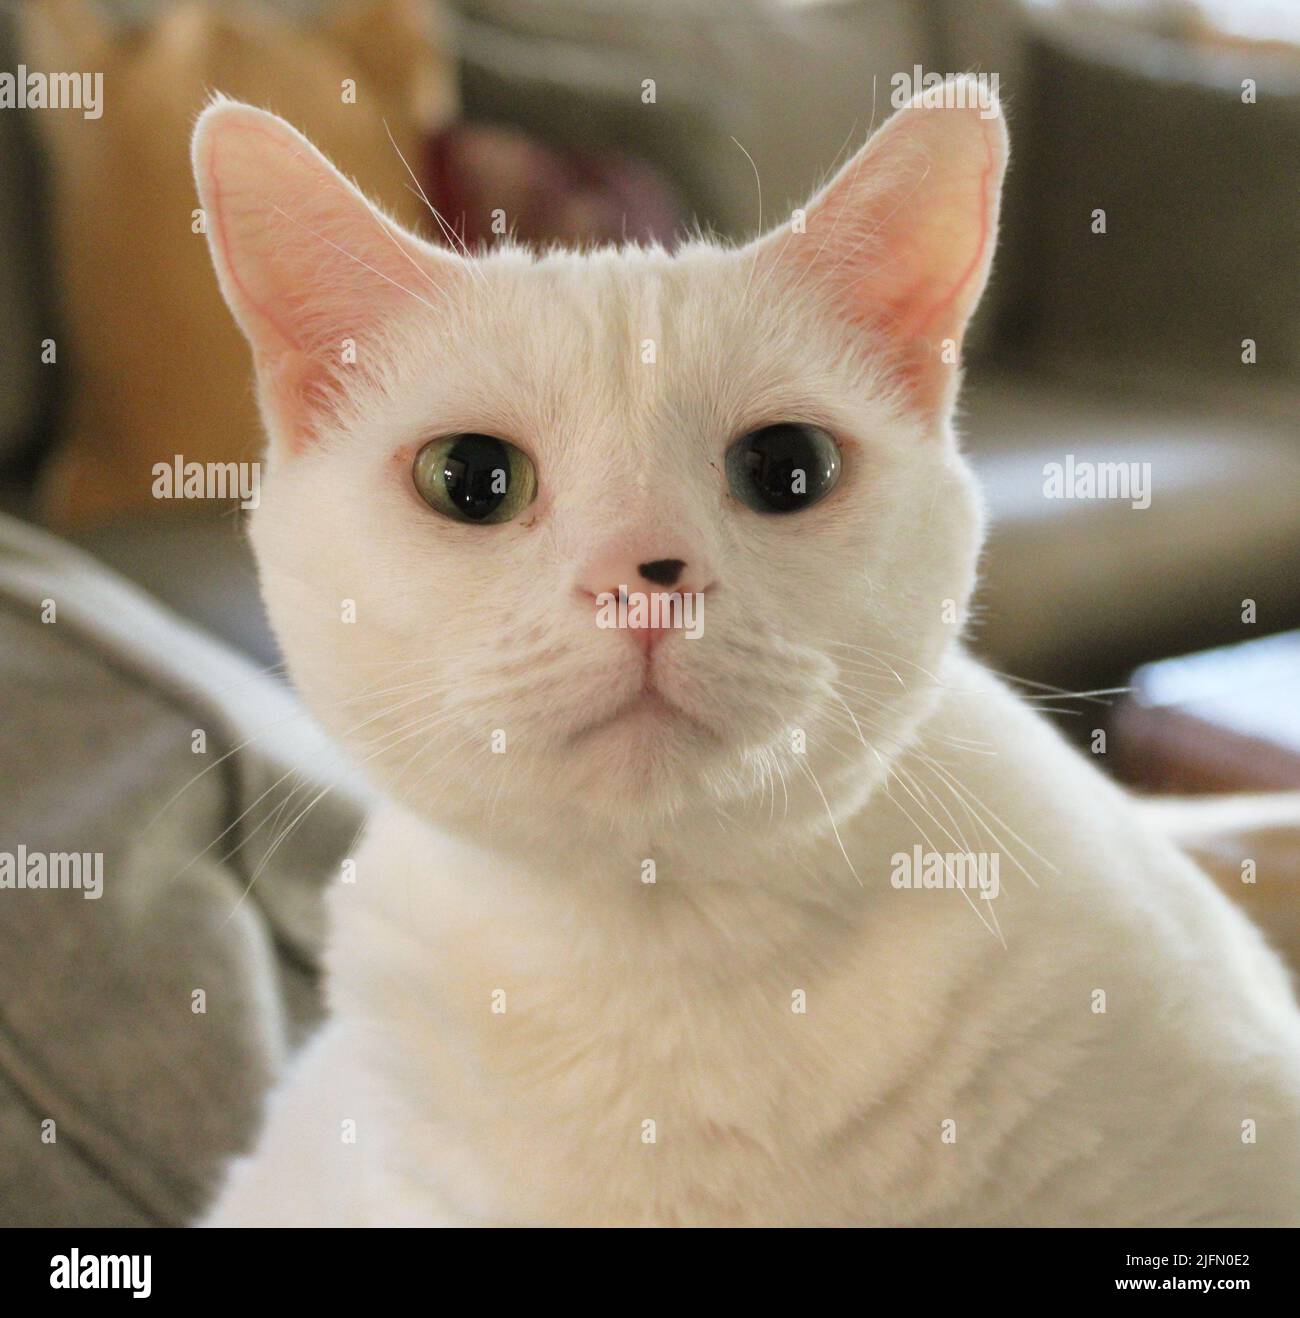 A White Domestic Cat with Two Different Colored Eyes Stock Photo